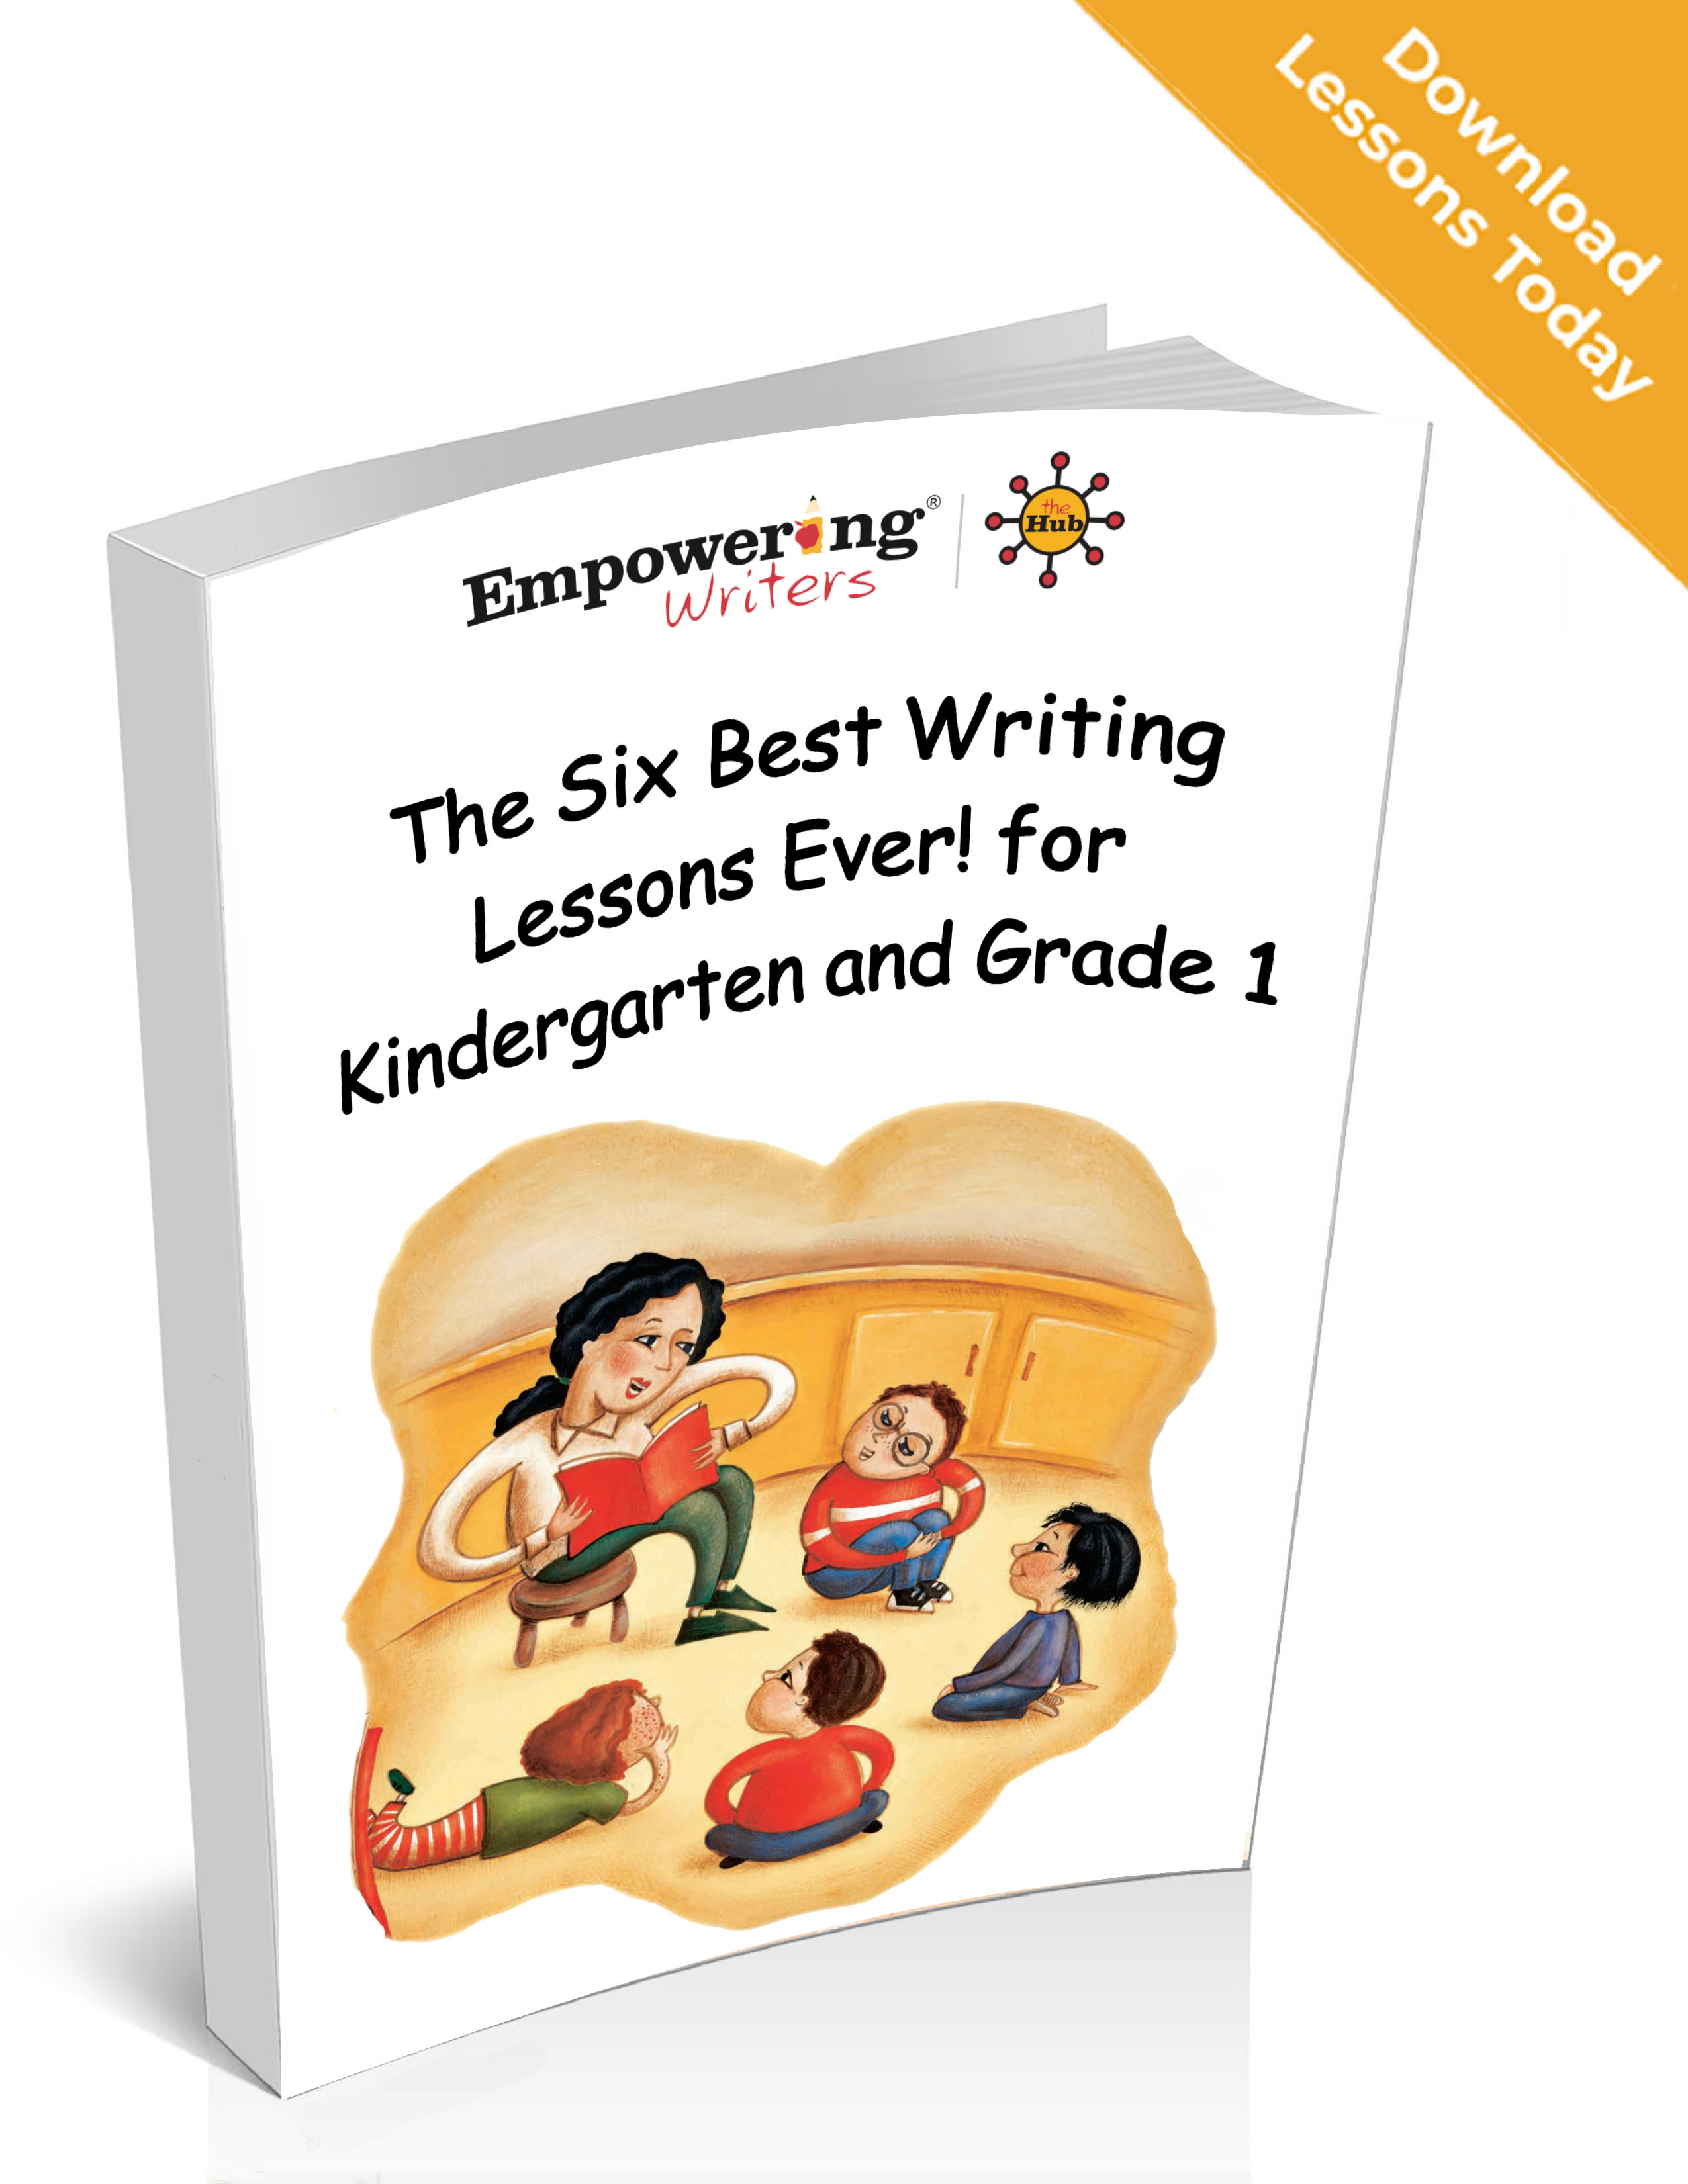 The Six Best Writing Lessons Ever for Kindergarten and Grade 1